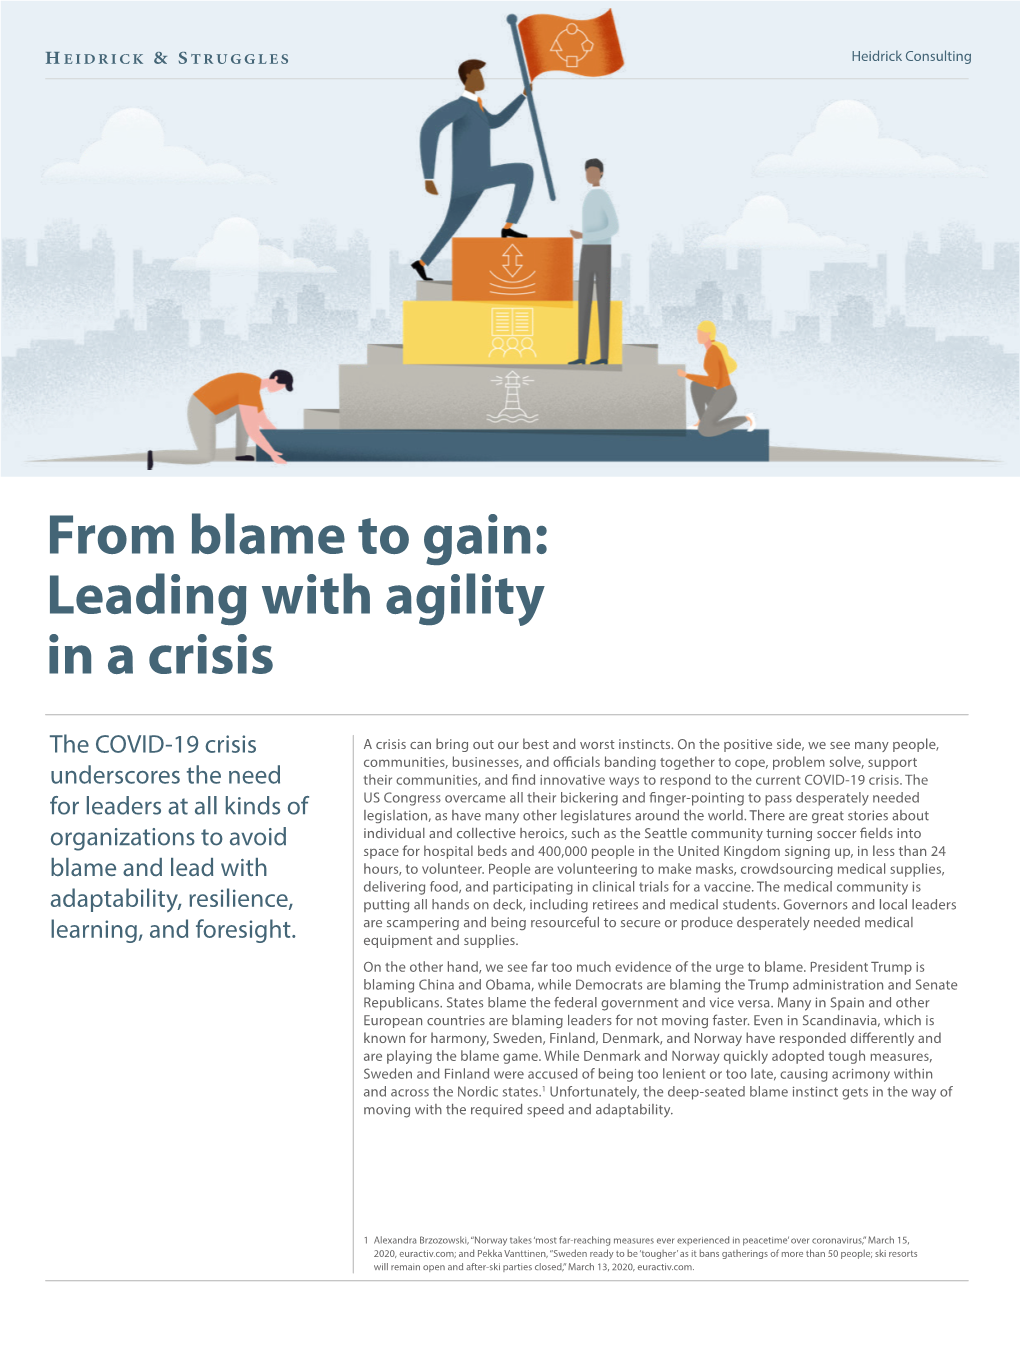 Leading with Agility in a Crisis